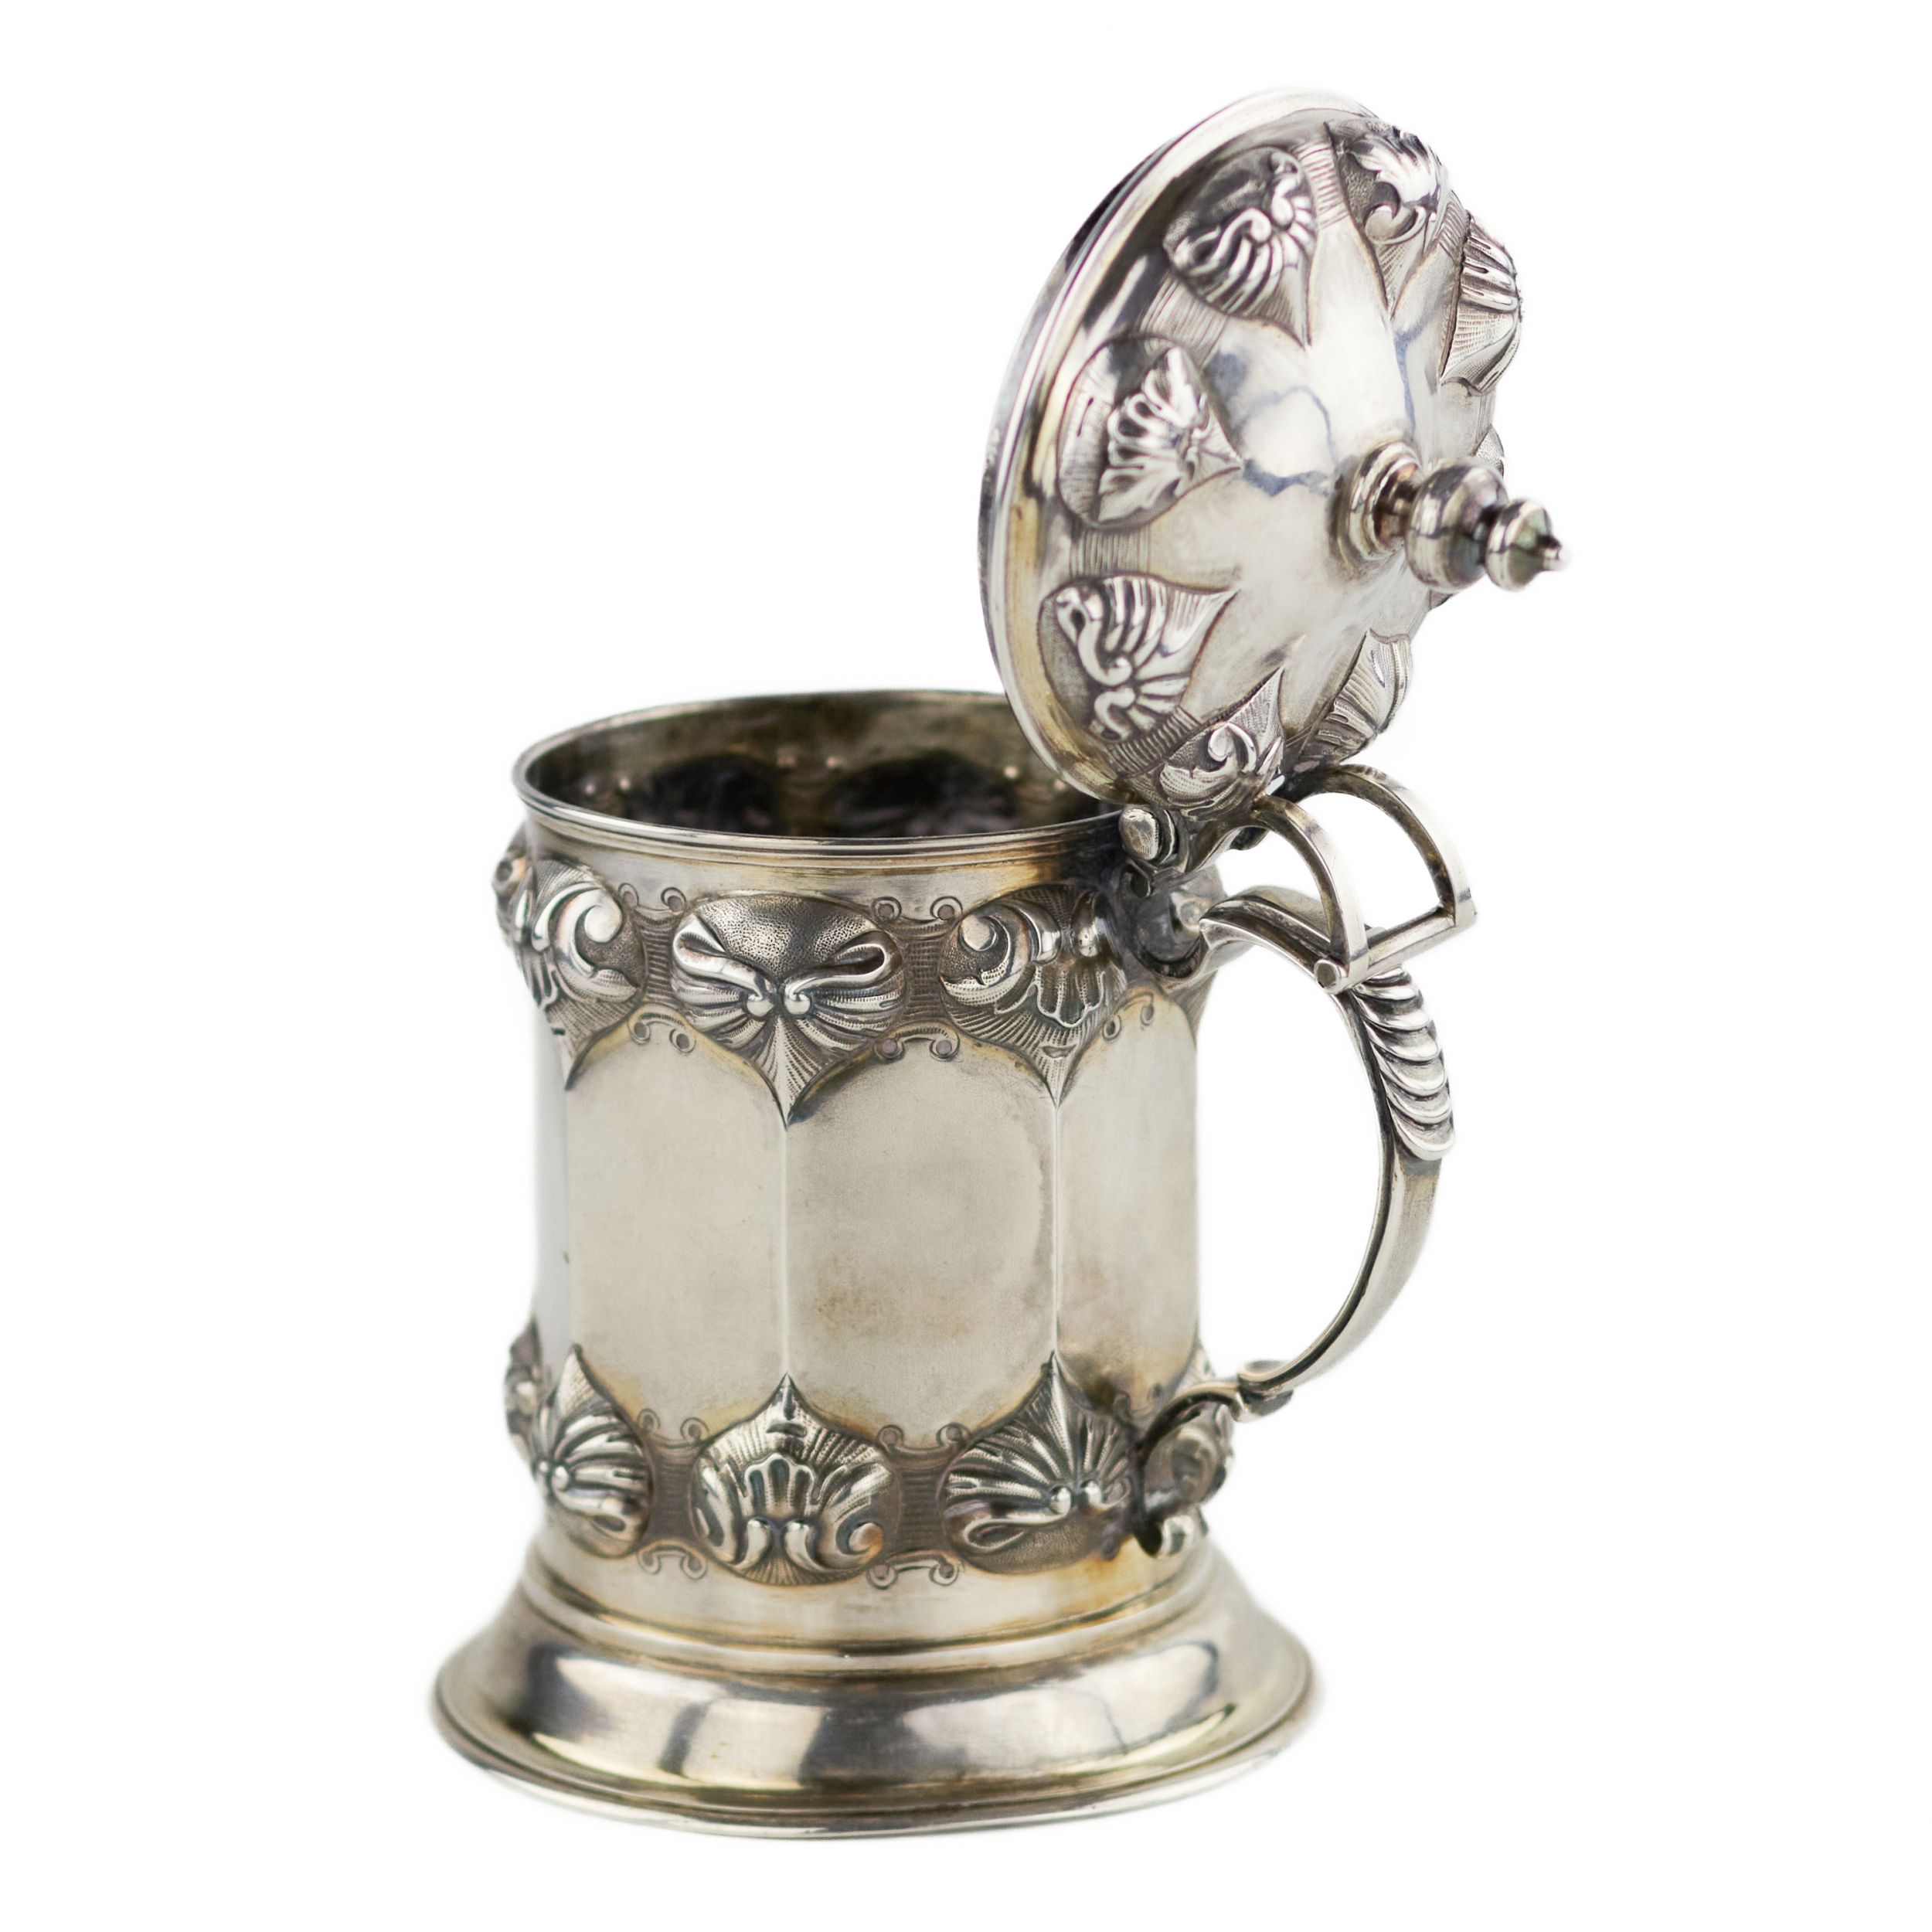 I. Nordberg. Russian, silver mug in the style of Roman-Gothic historicism. Petersburg. 1839 - Image 3 of 9